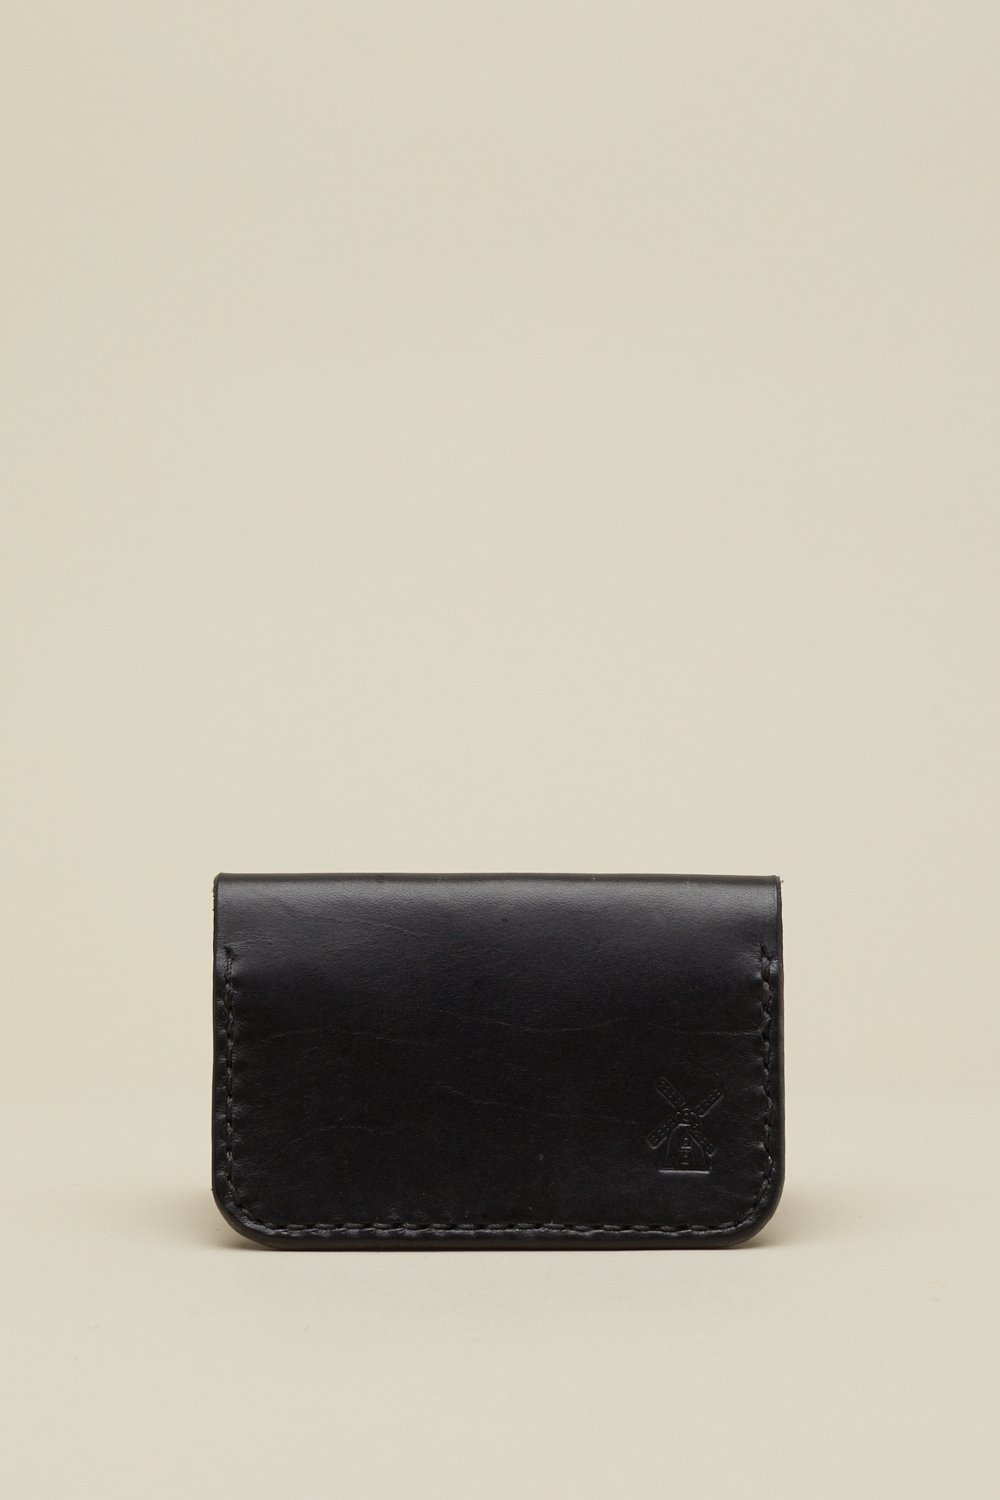 Image of Fold Wallet in Coal